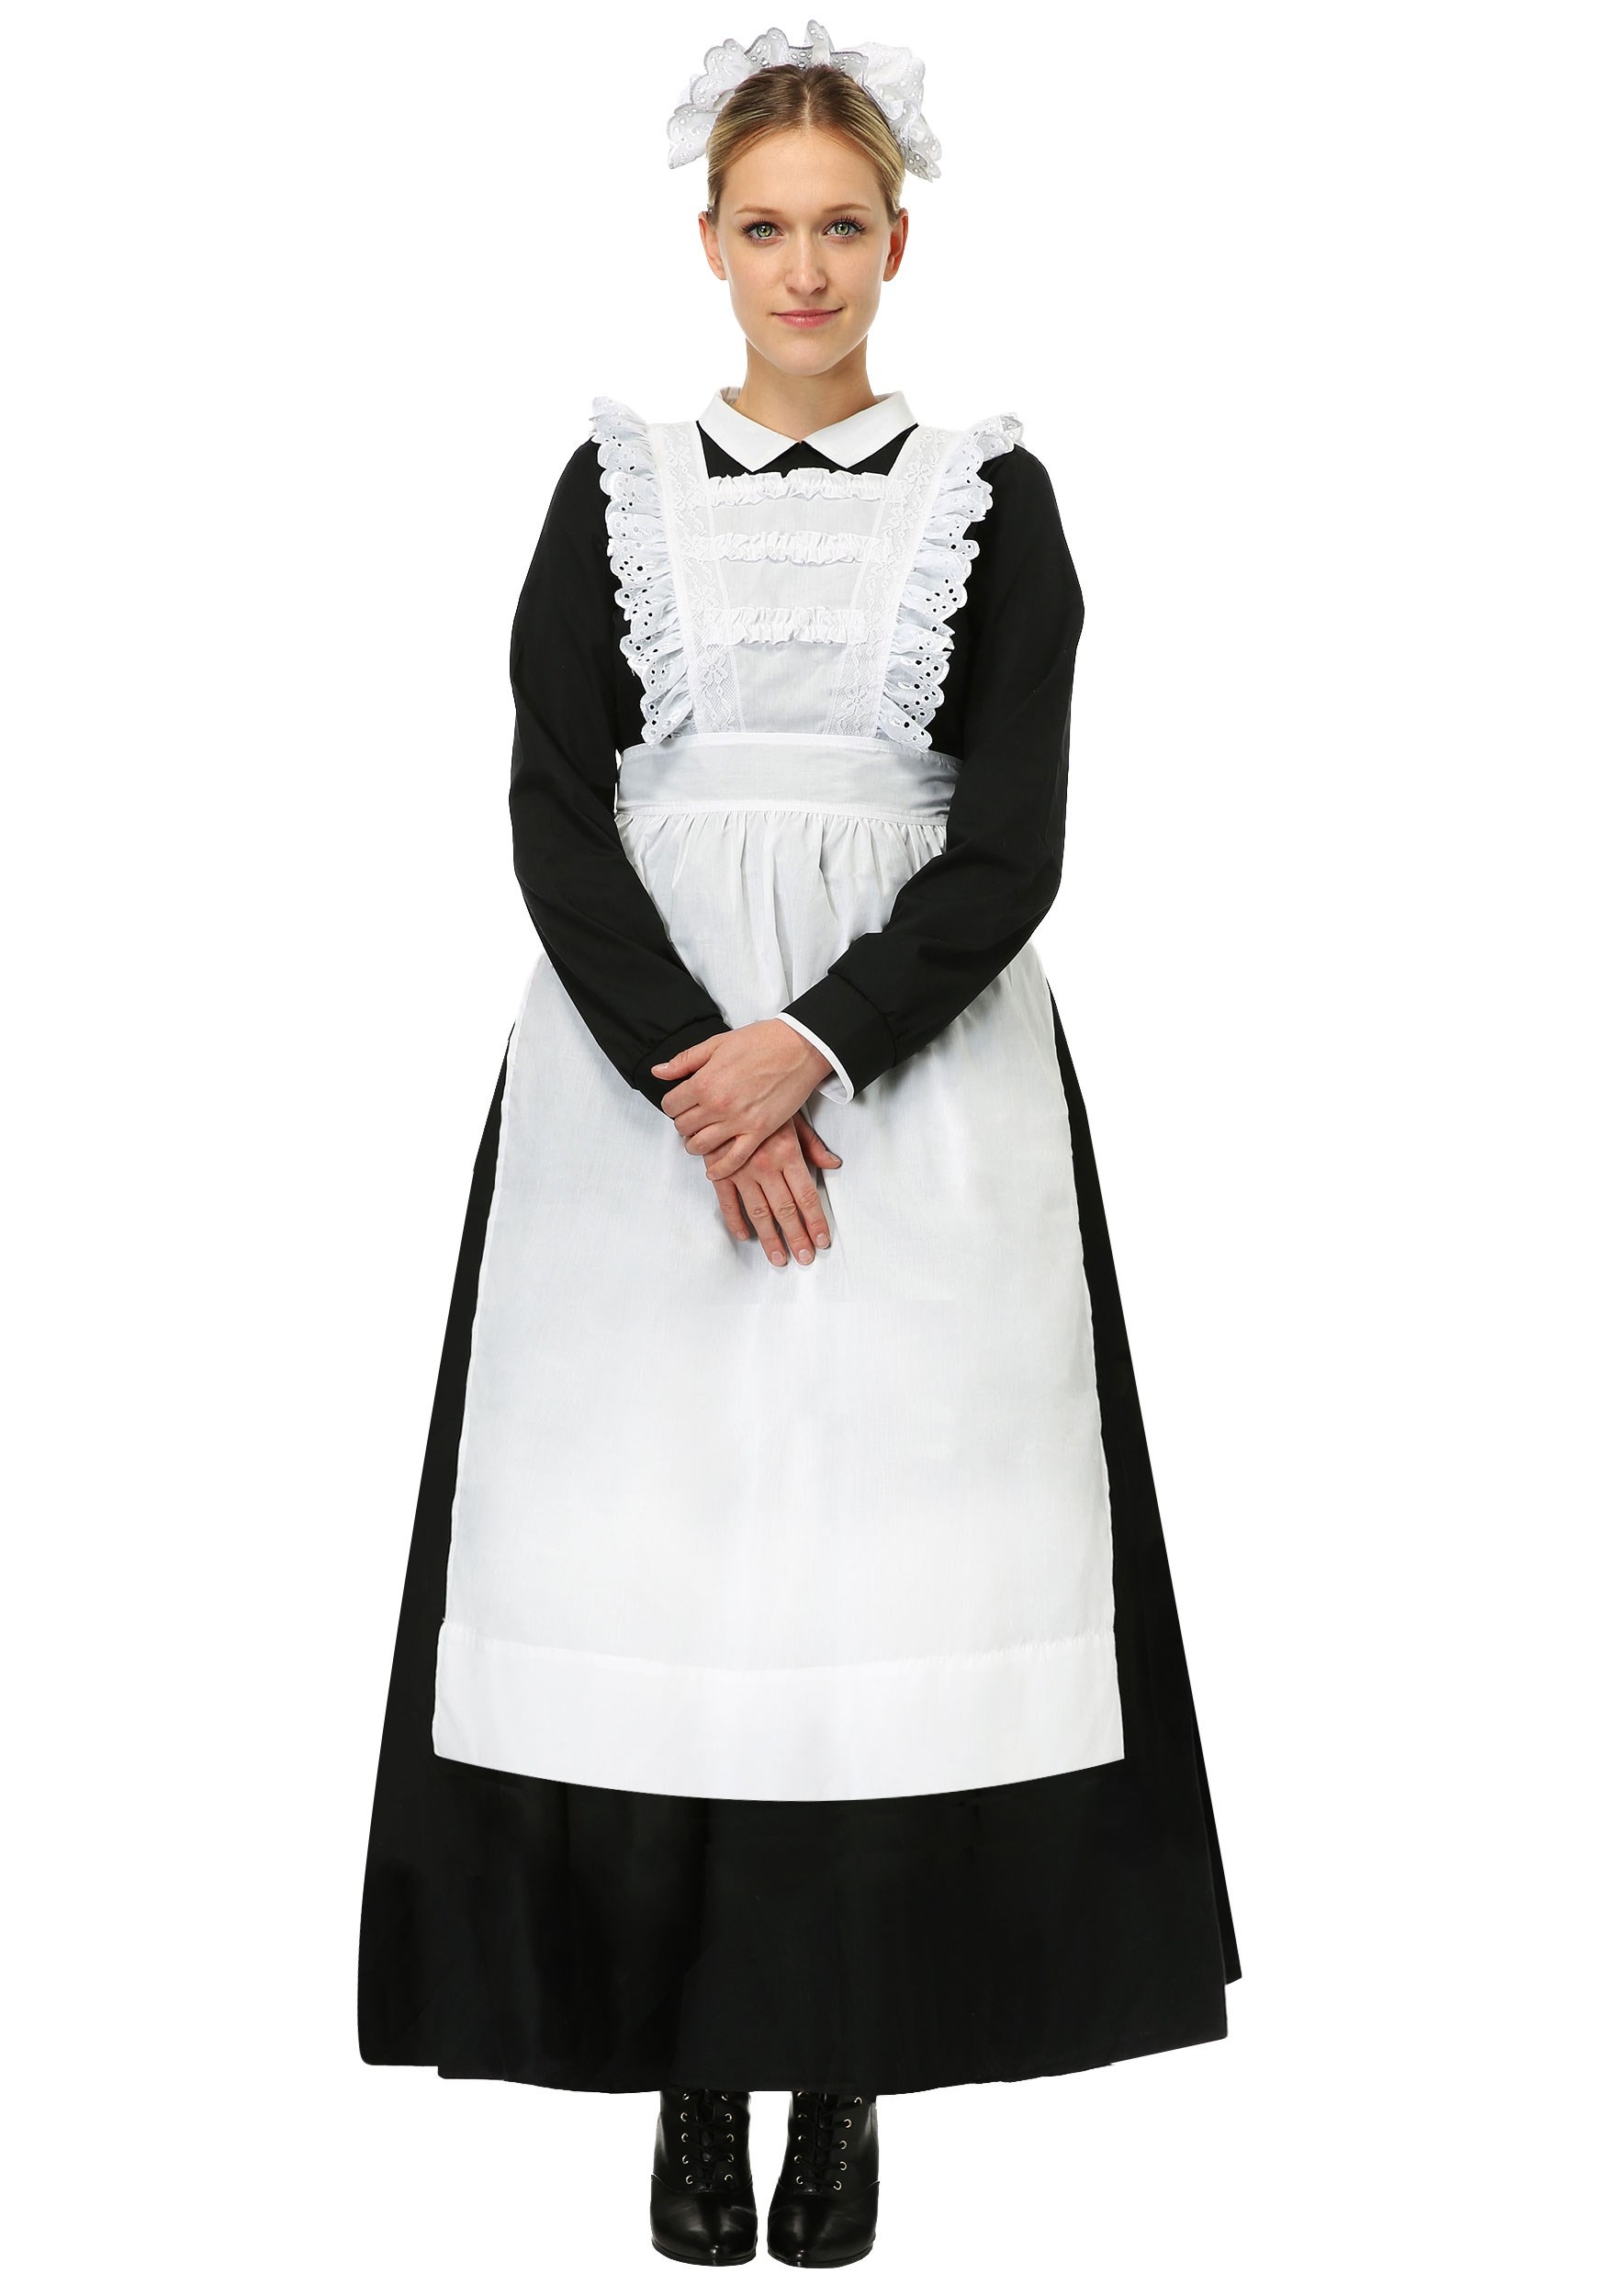 1900s, 1910s, WW1, Titanic Costumes Traditional Plus Size Maid Costume for Women $69.99 AT vintagedancer.com